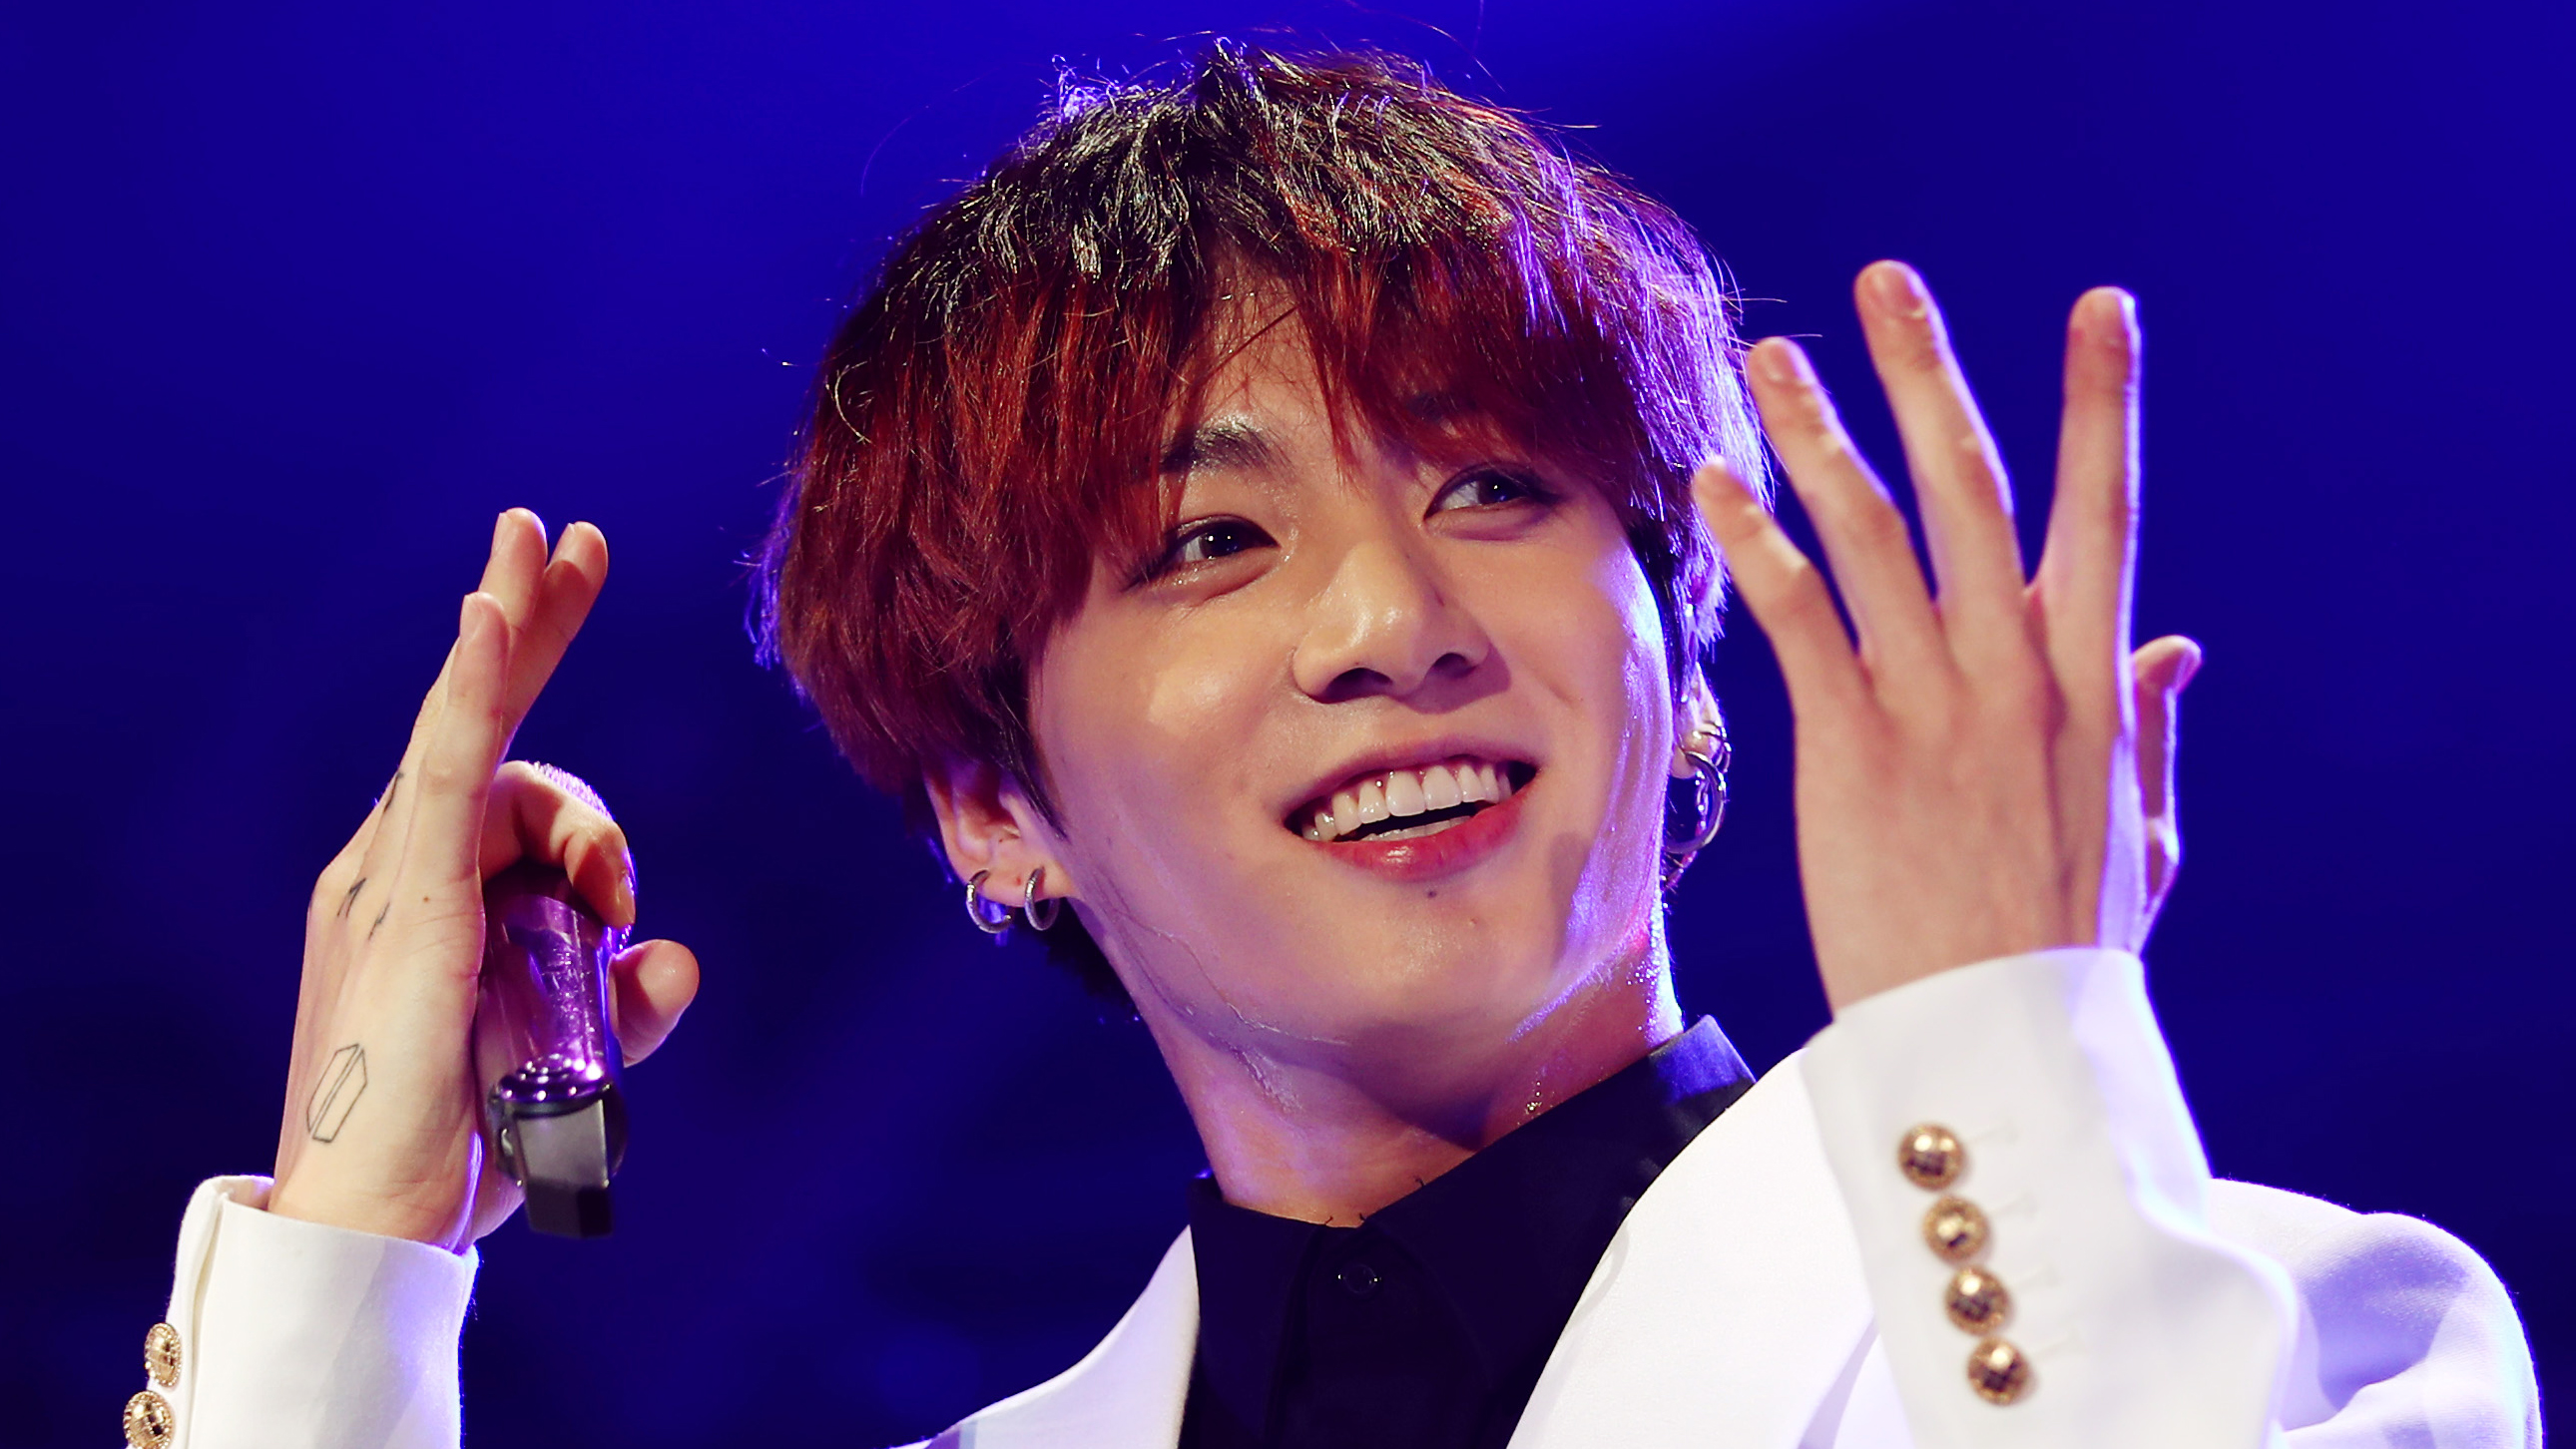 Jungkook of BTS performs onstage during 102.7 KIIS FM's Jingle Ball 2019 at the Forum on December 6, 2019 in Los Angeles, California.